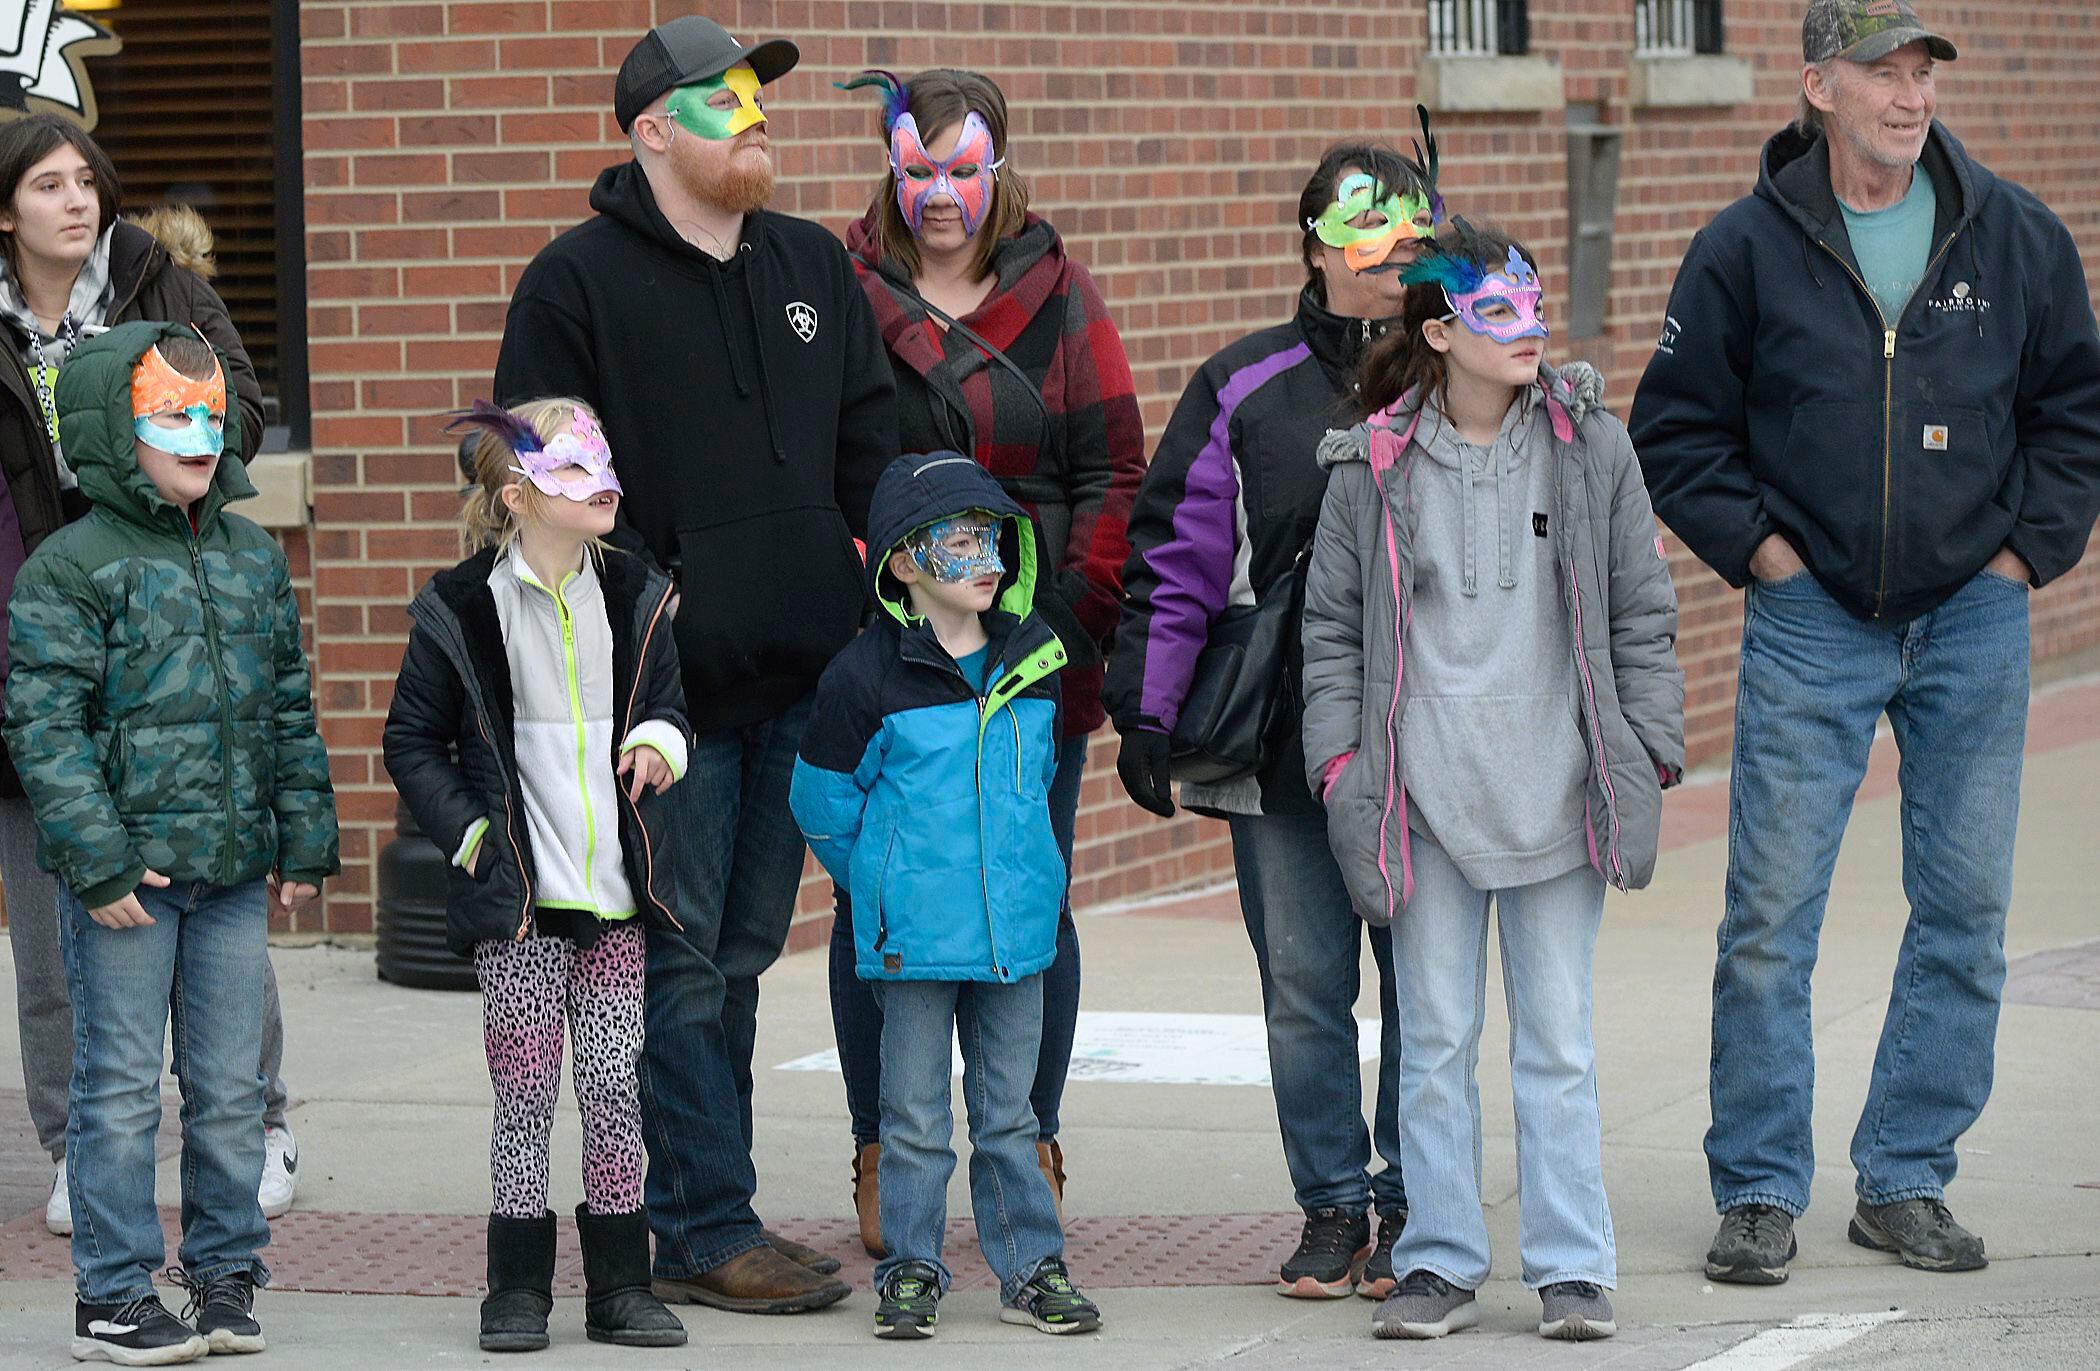 Hundreds attended the annual Mardi Gras parade Saturday, Feb. 18, 2023, in Utica. The parade made two trips around Mill Street.